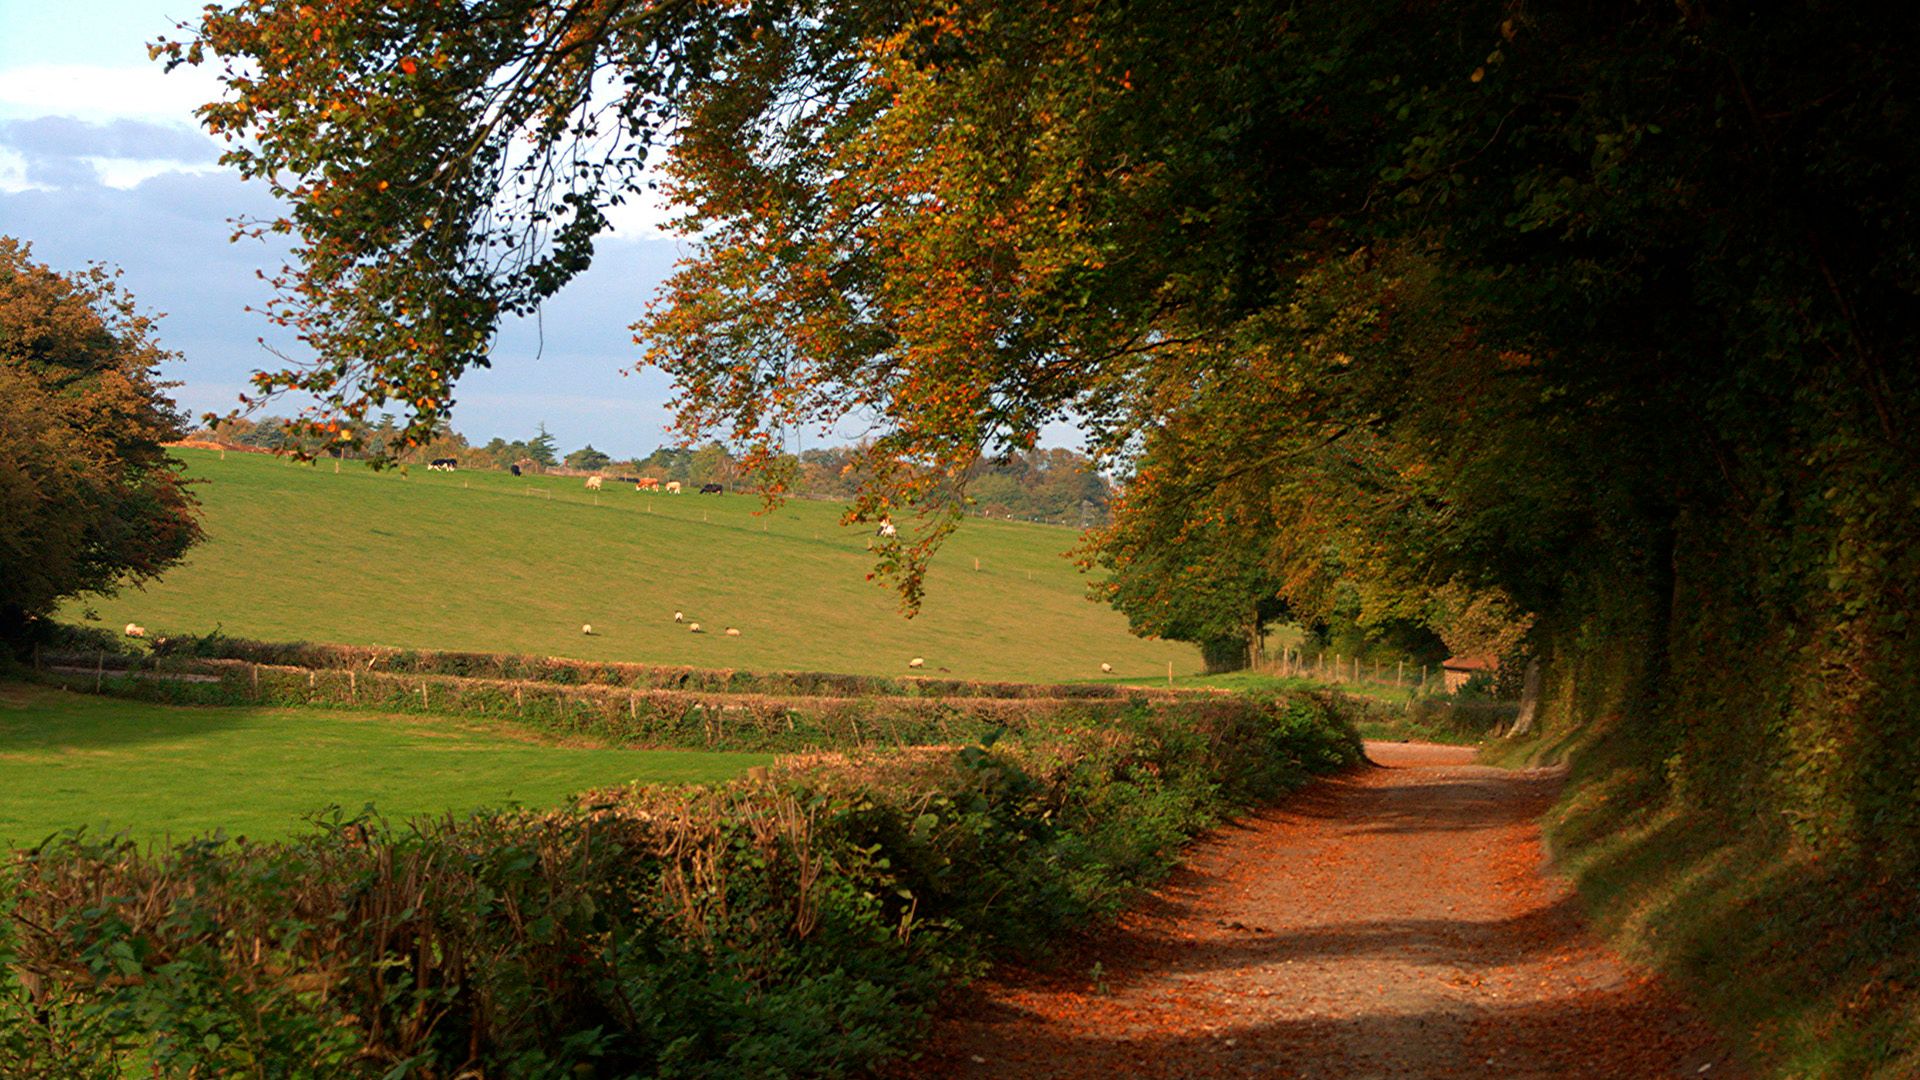 A country lane with hedges at either side and fields to one side